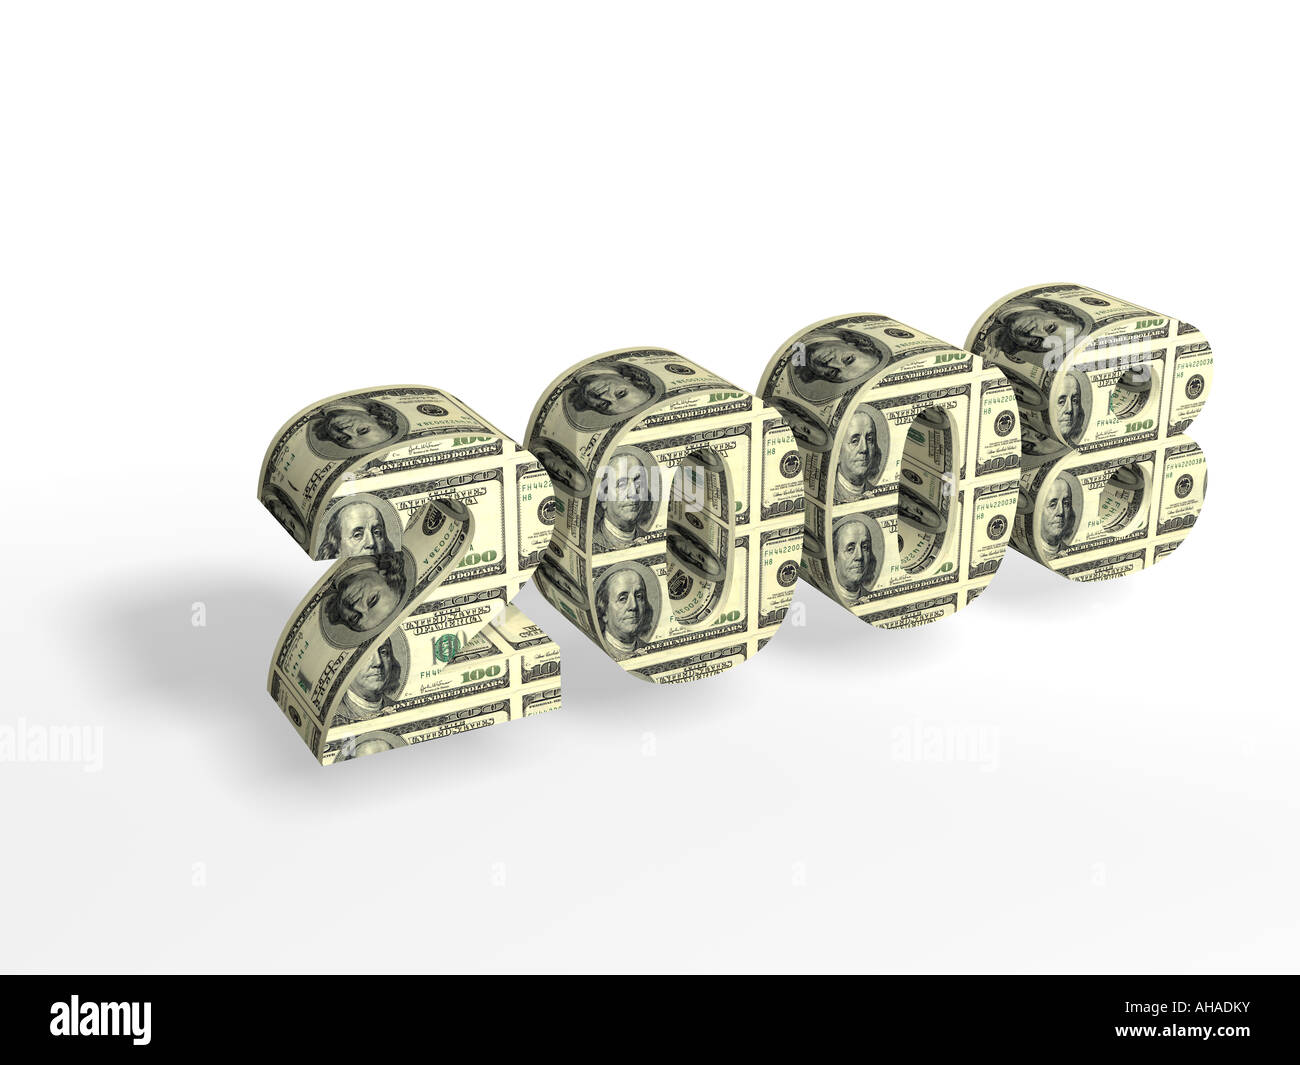 String 2008 US dollars painted on white background Stock Photo